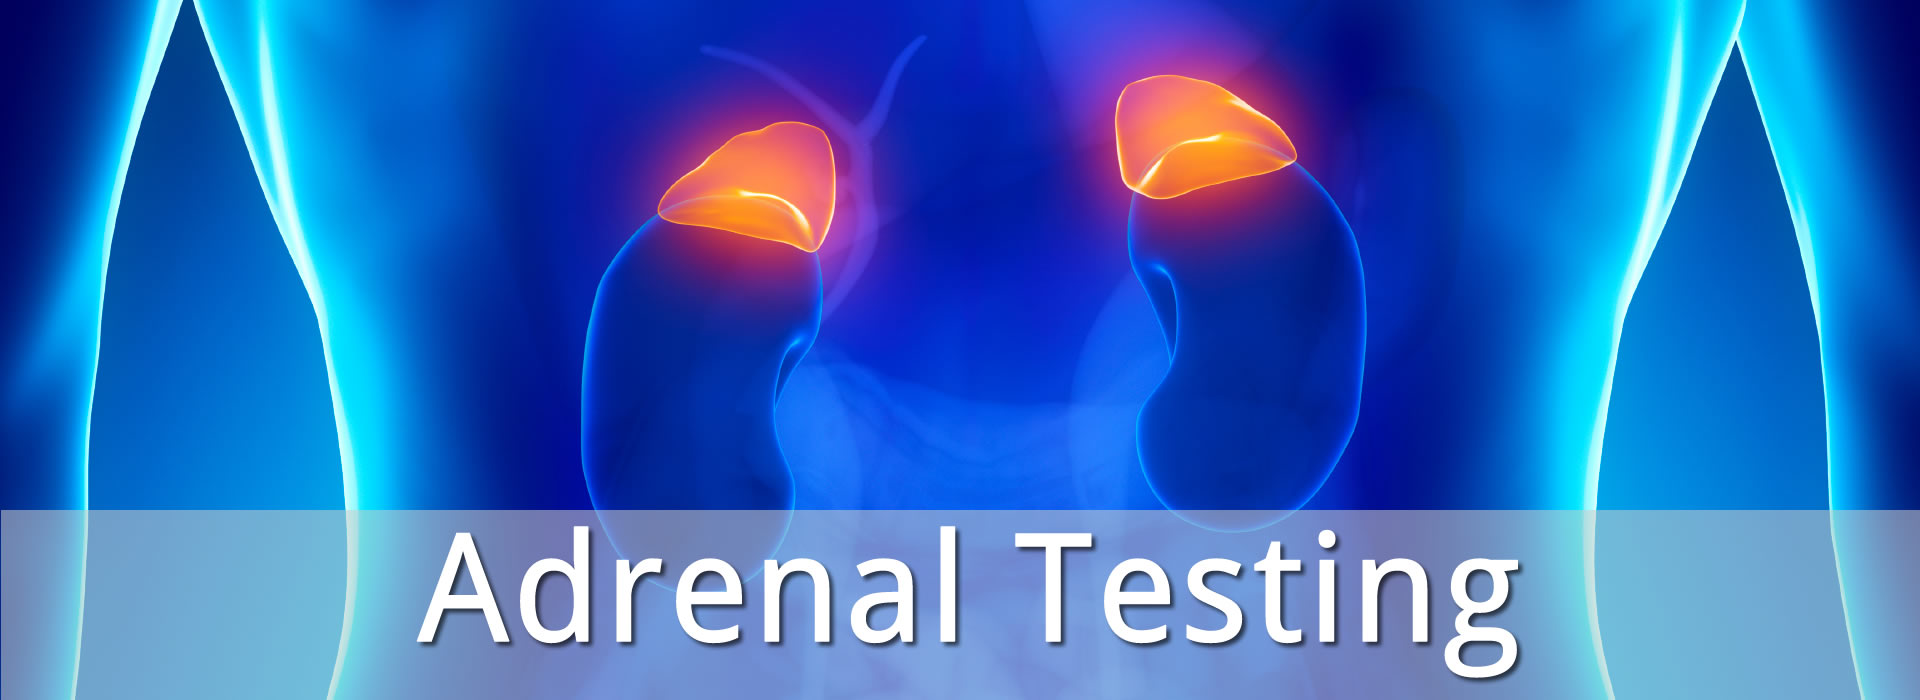 adrenal issues and weight gain